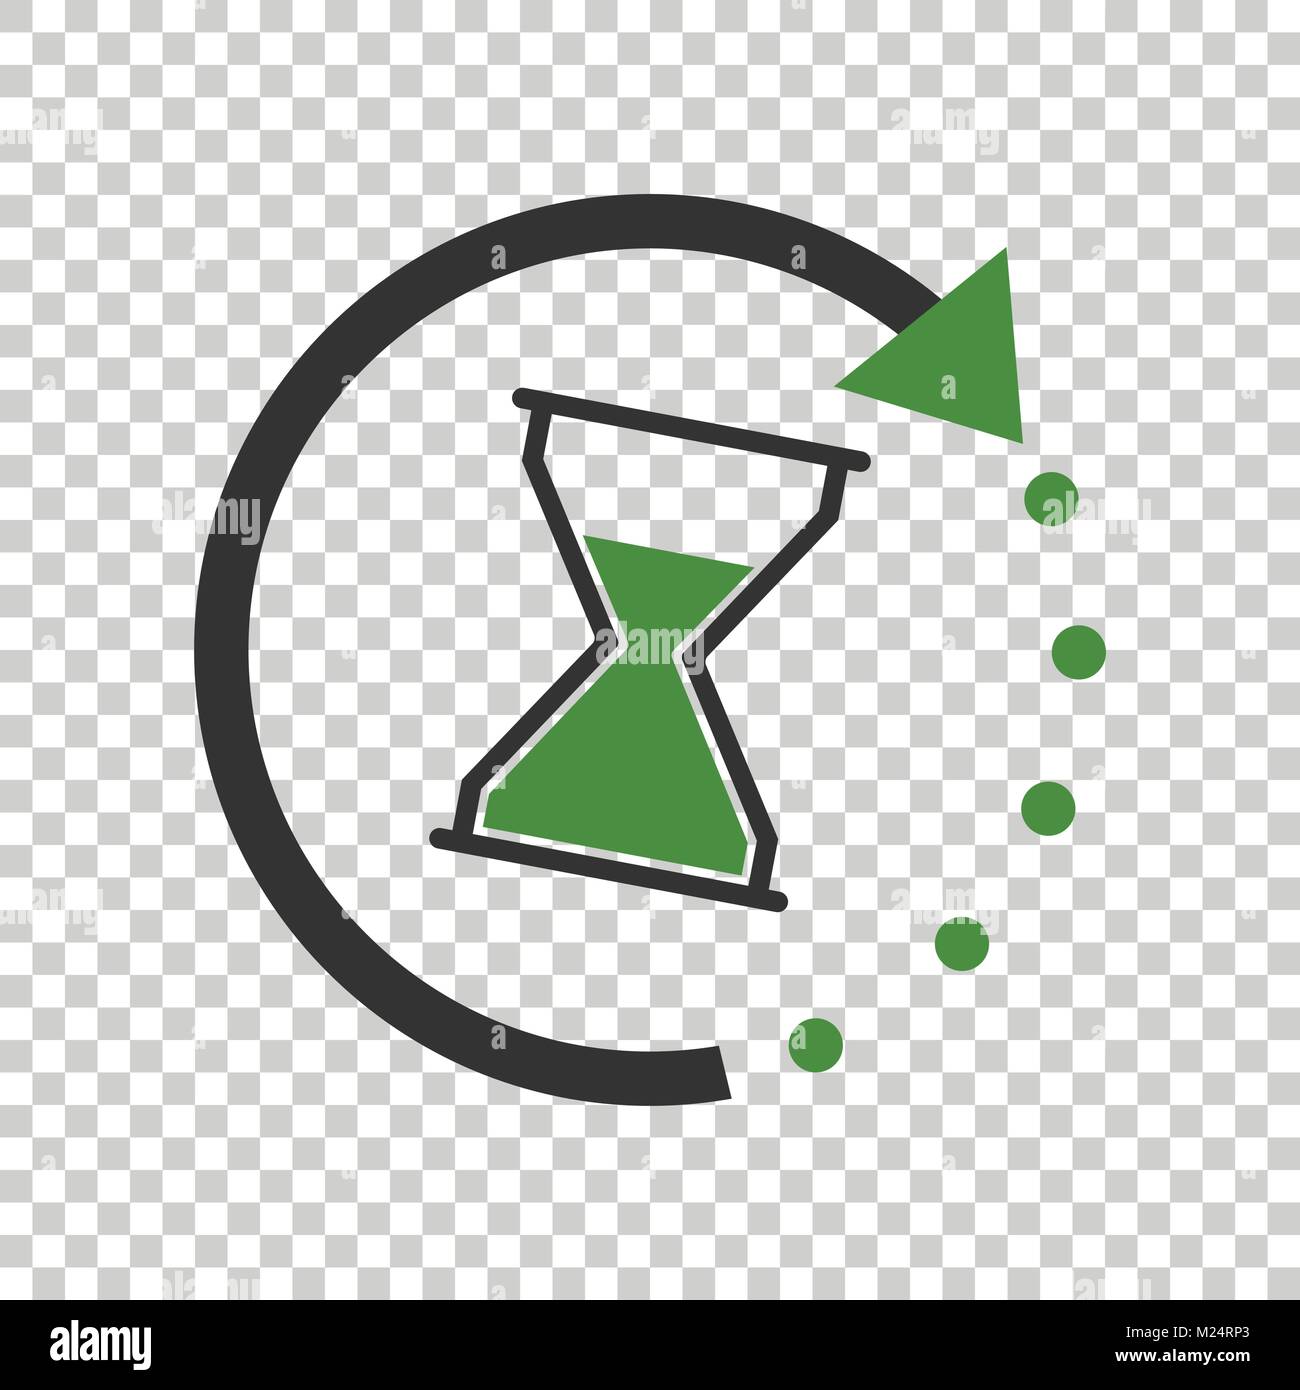 Time icon. Flat vector illustration with hourglass on isolated background. Stock Vector